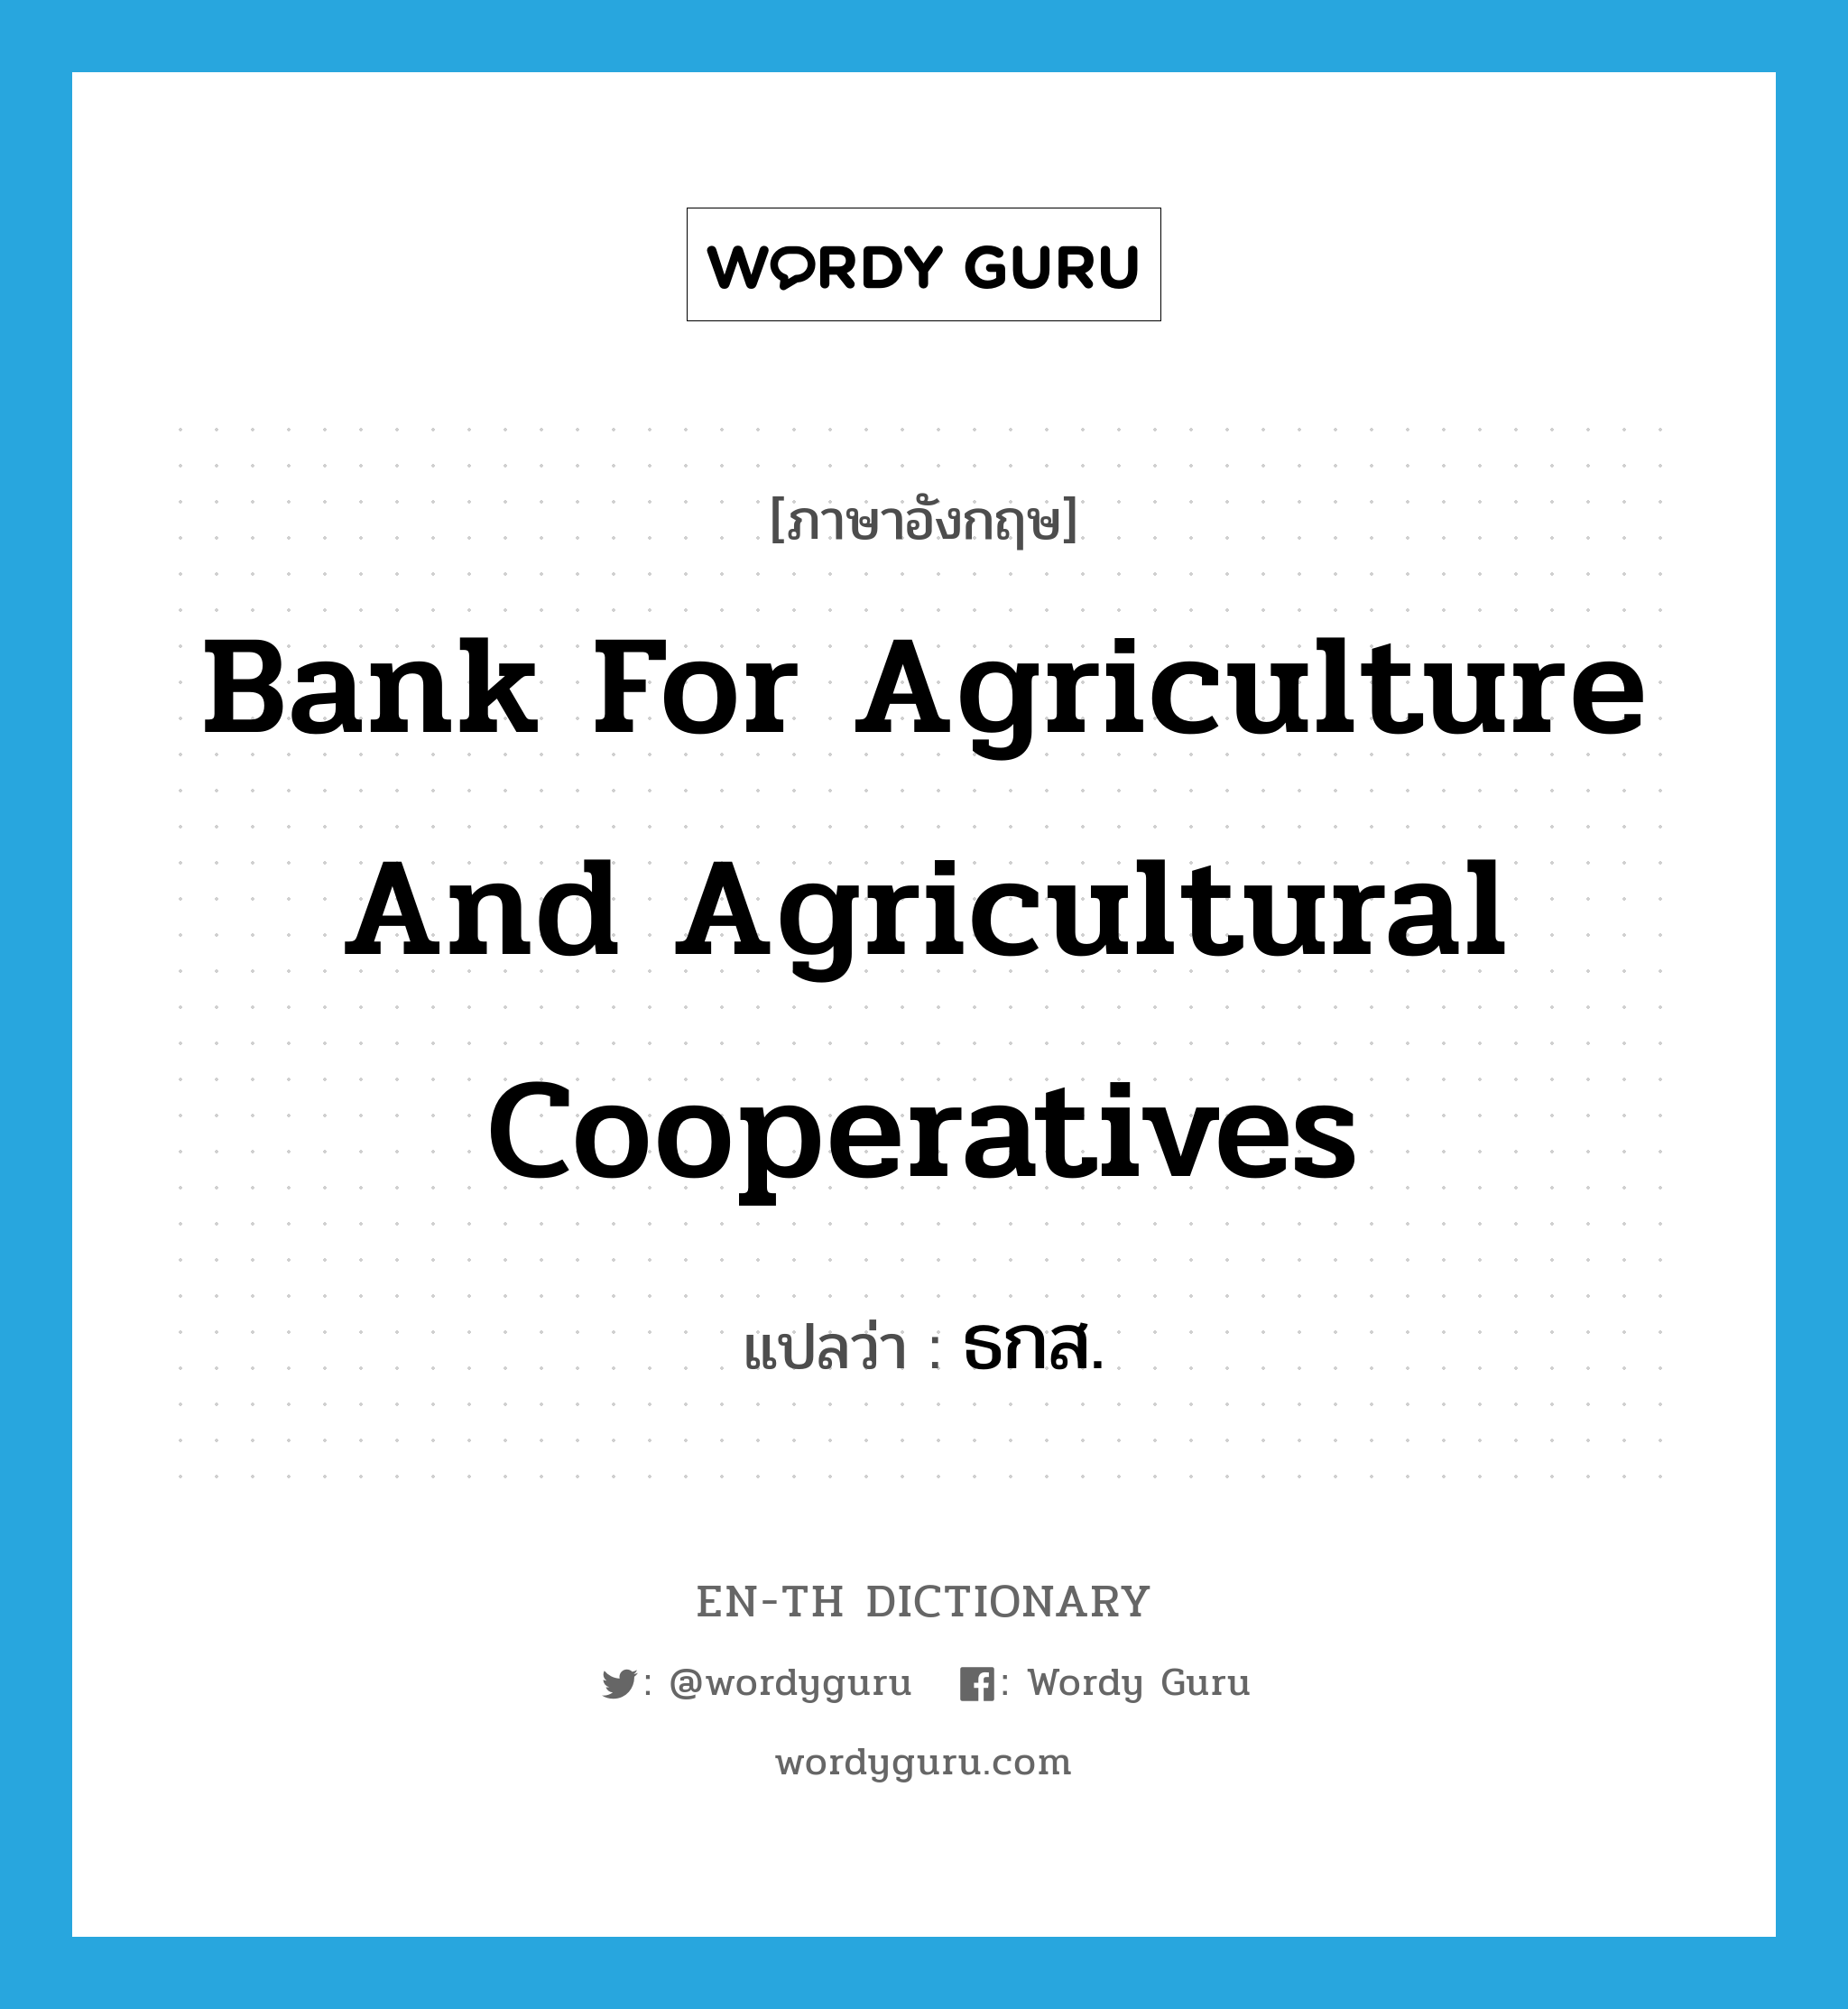 Bank for Agriculture and Agricultural Cooperatives แปลว่า?, คำศัพท์ภาษาอังกฤษ Bank for Agriculture and Agricultural Cooperatives แปลว่า ธกส. ประเภท N หมวด N